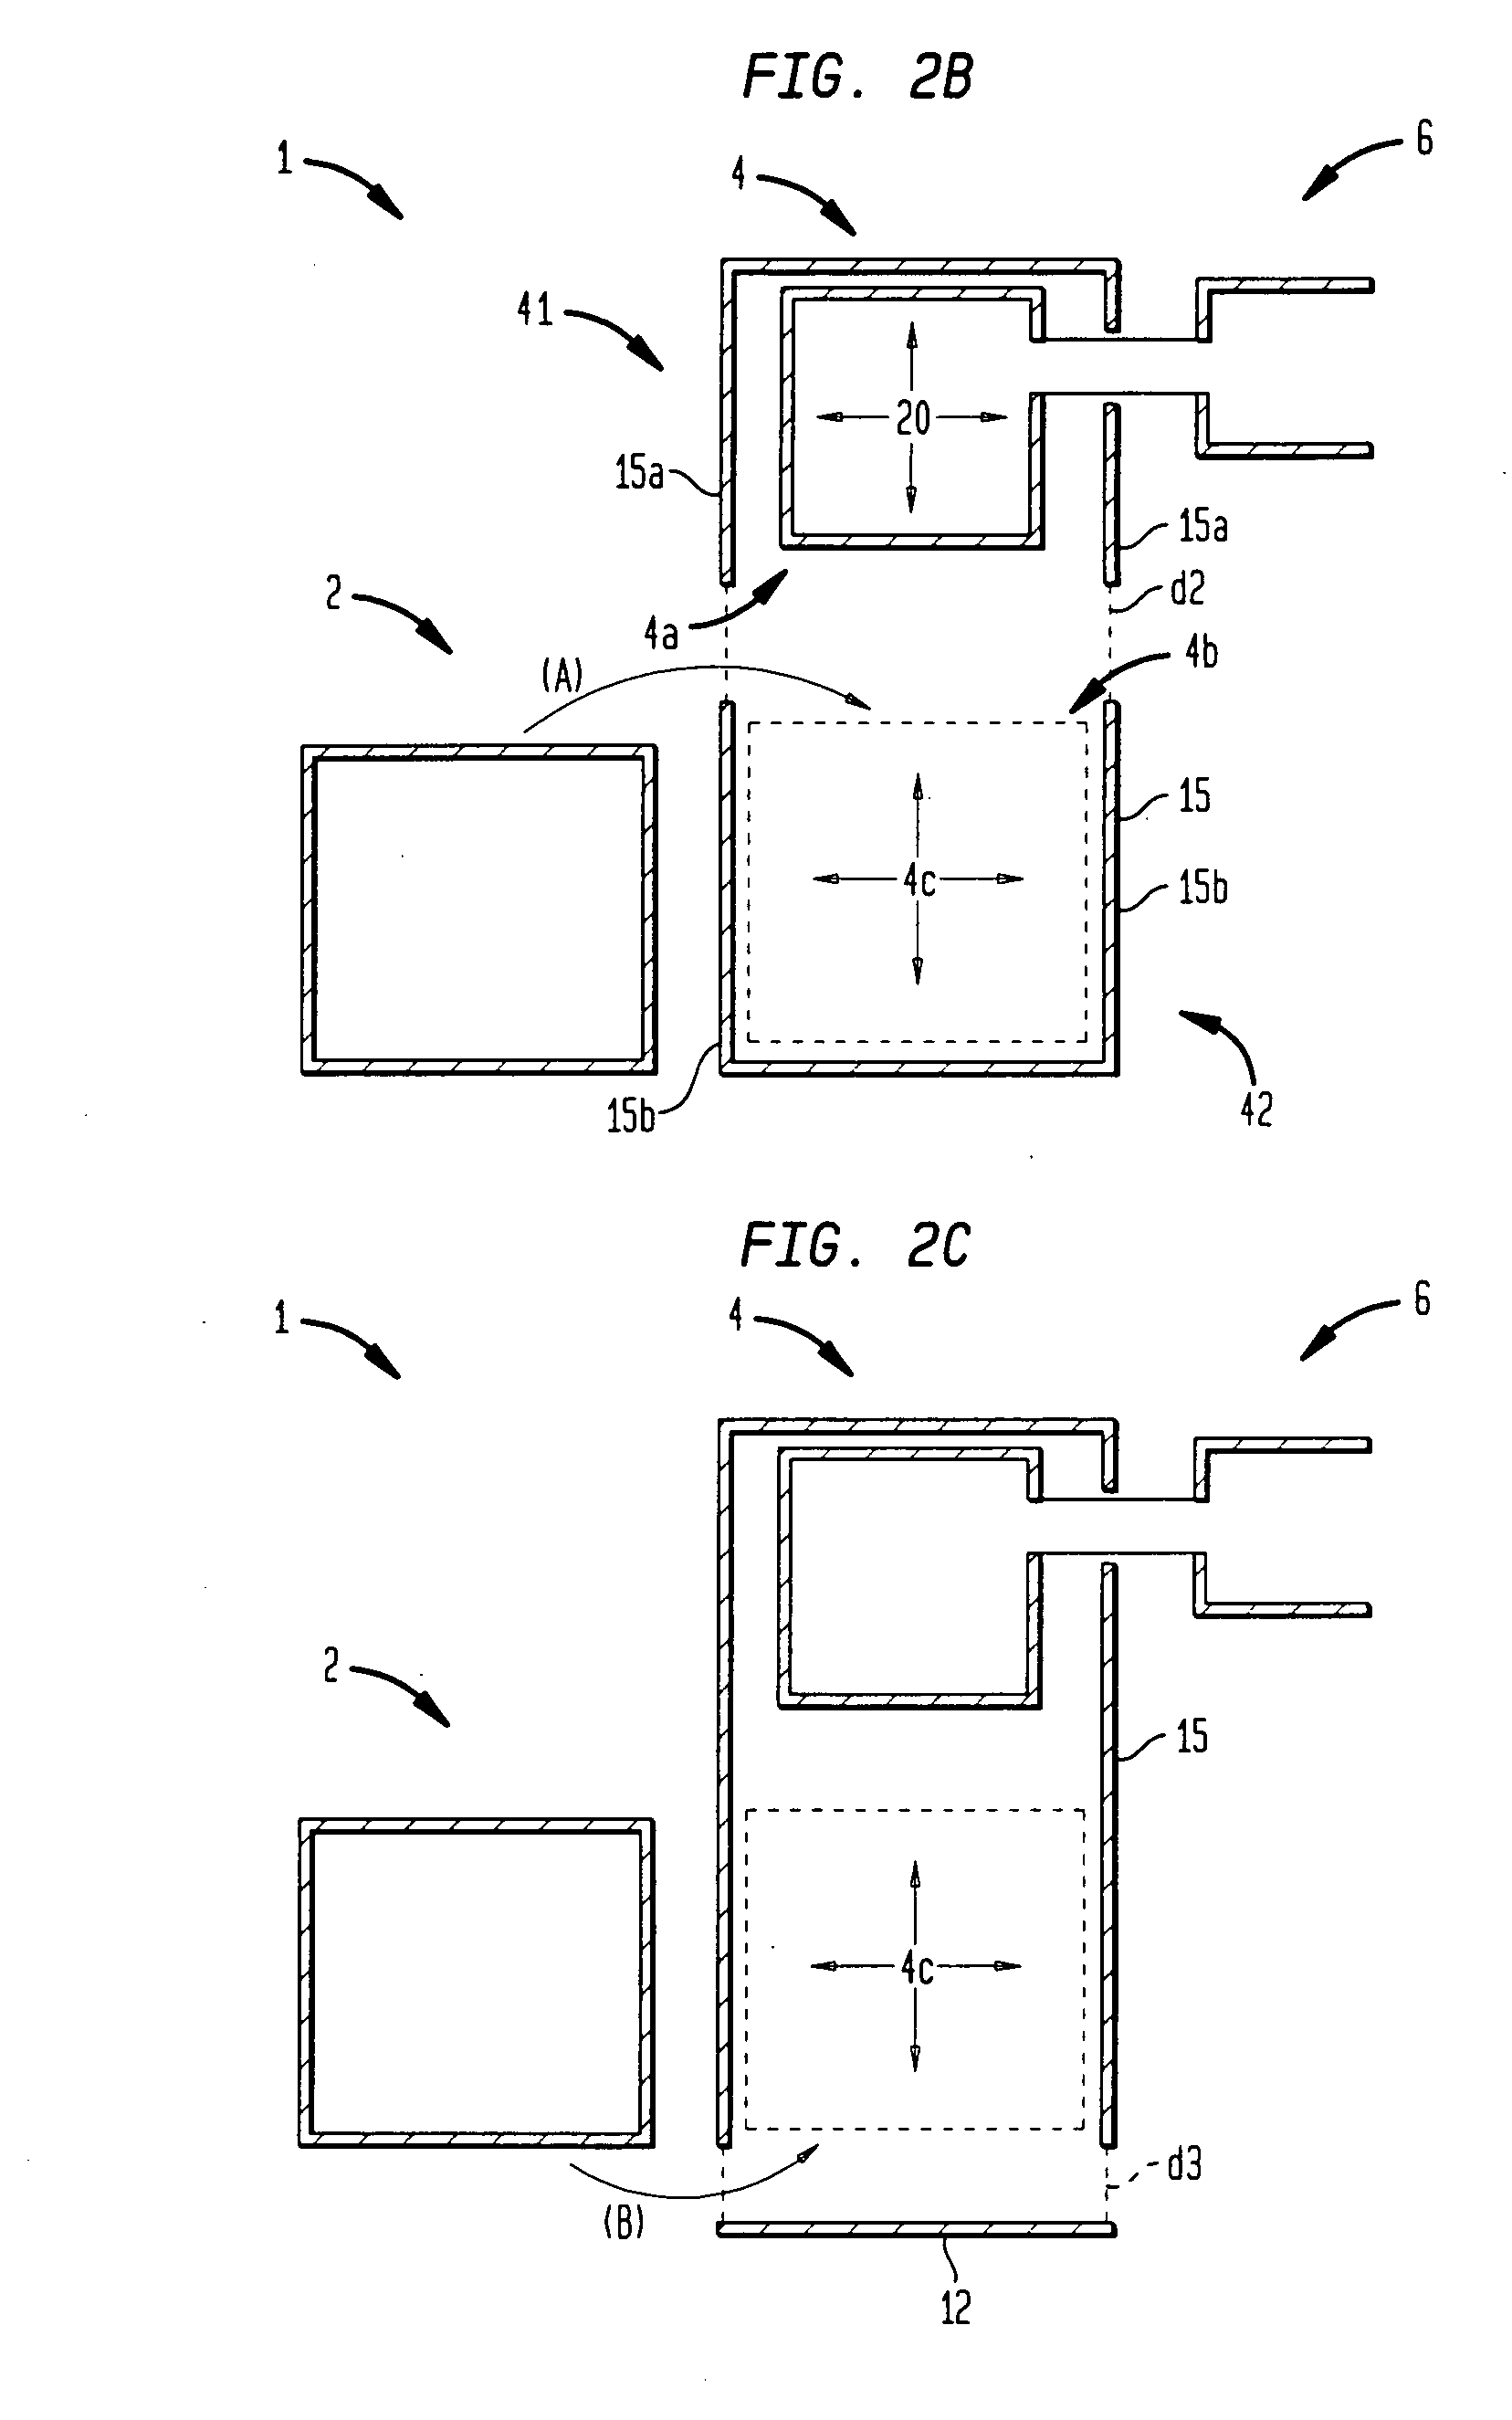 Method and devices for administration of therapeutic gases